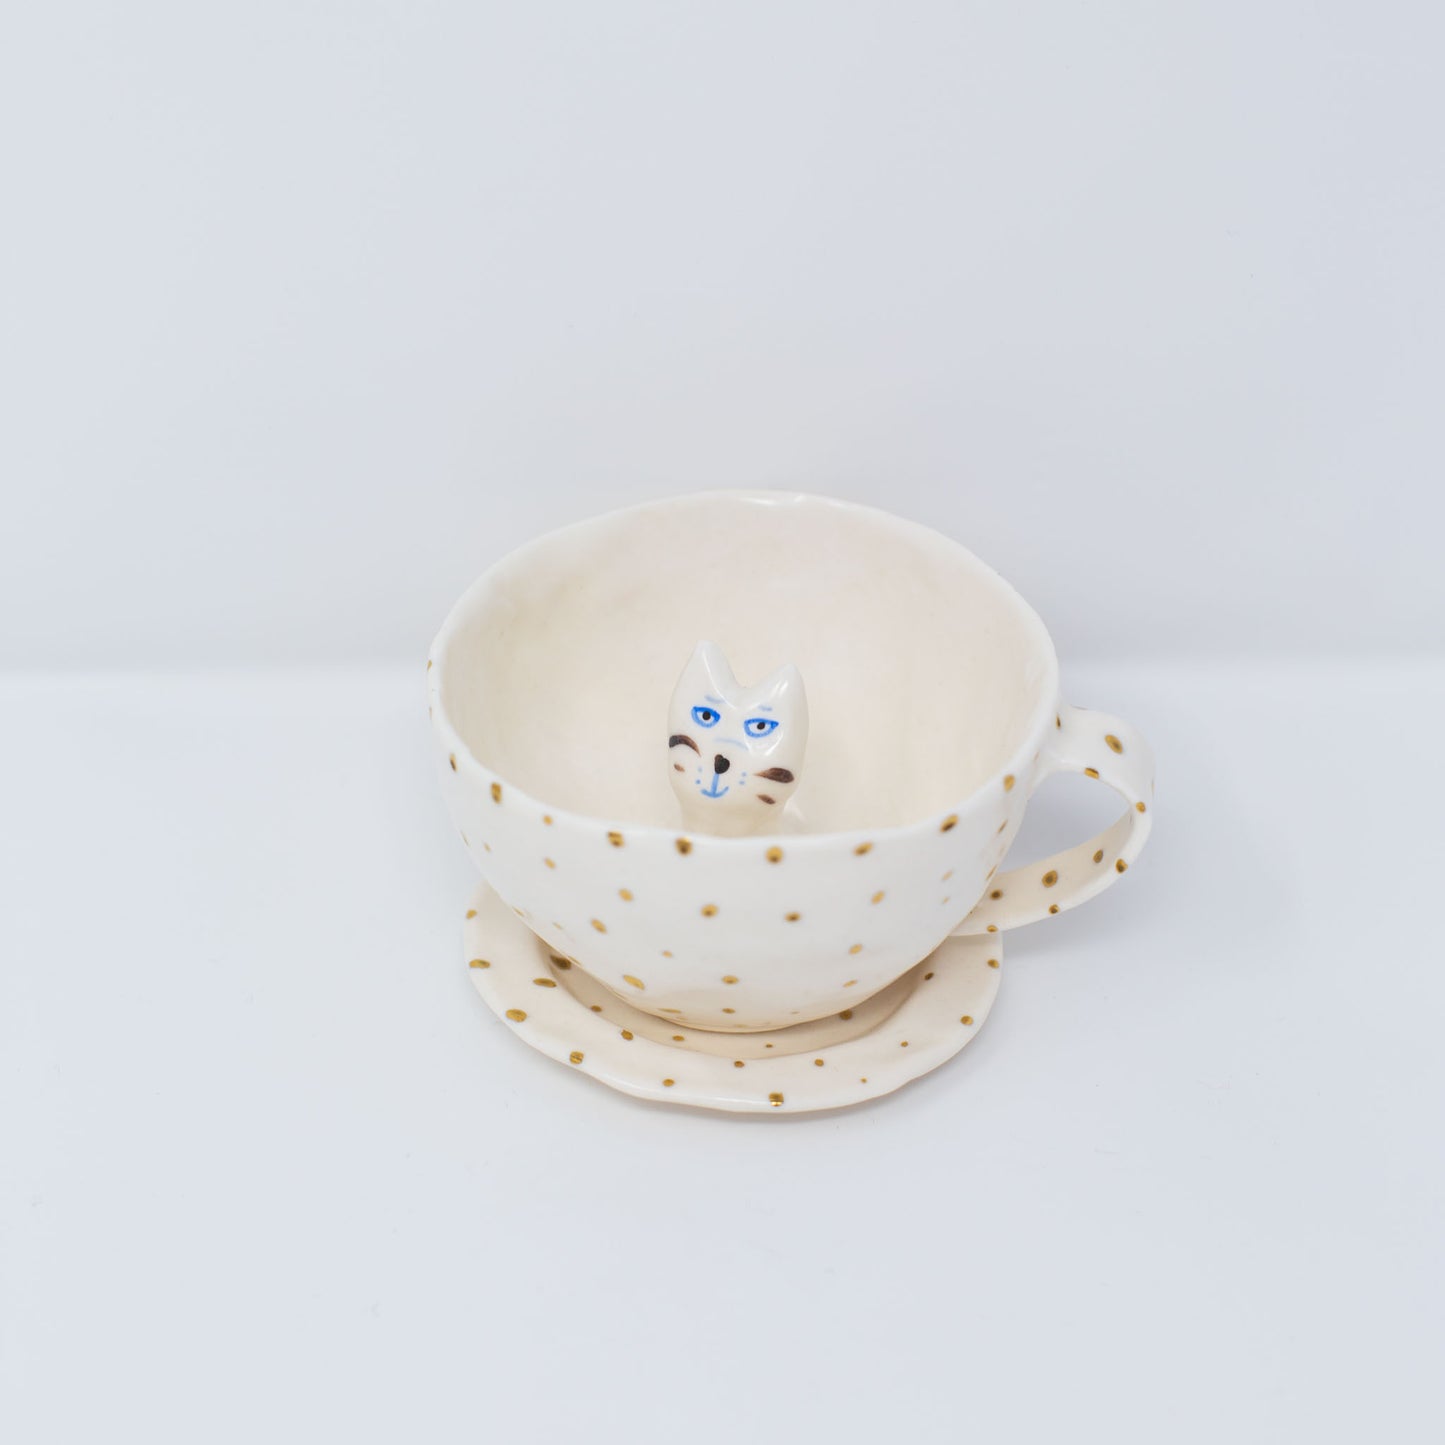 (20% off) Gold Polka Cat Cup with Saucer by Eleonor Bostrom